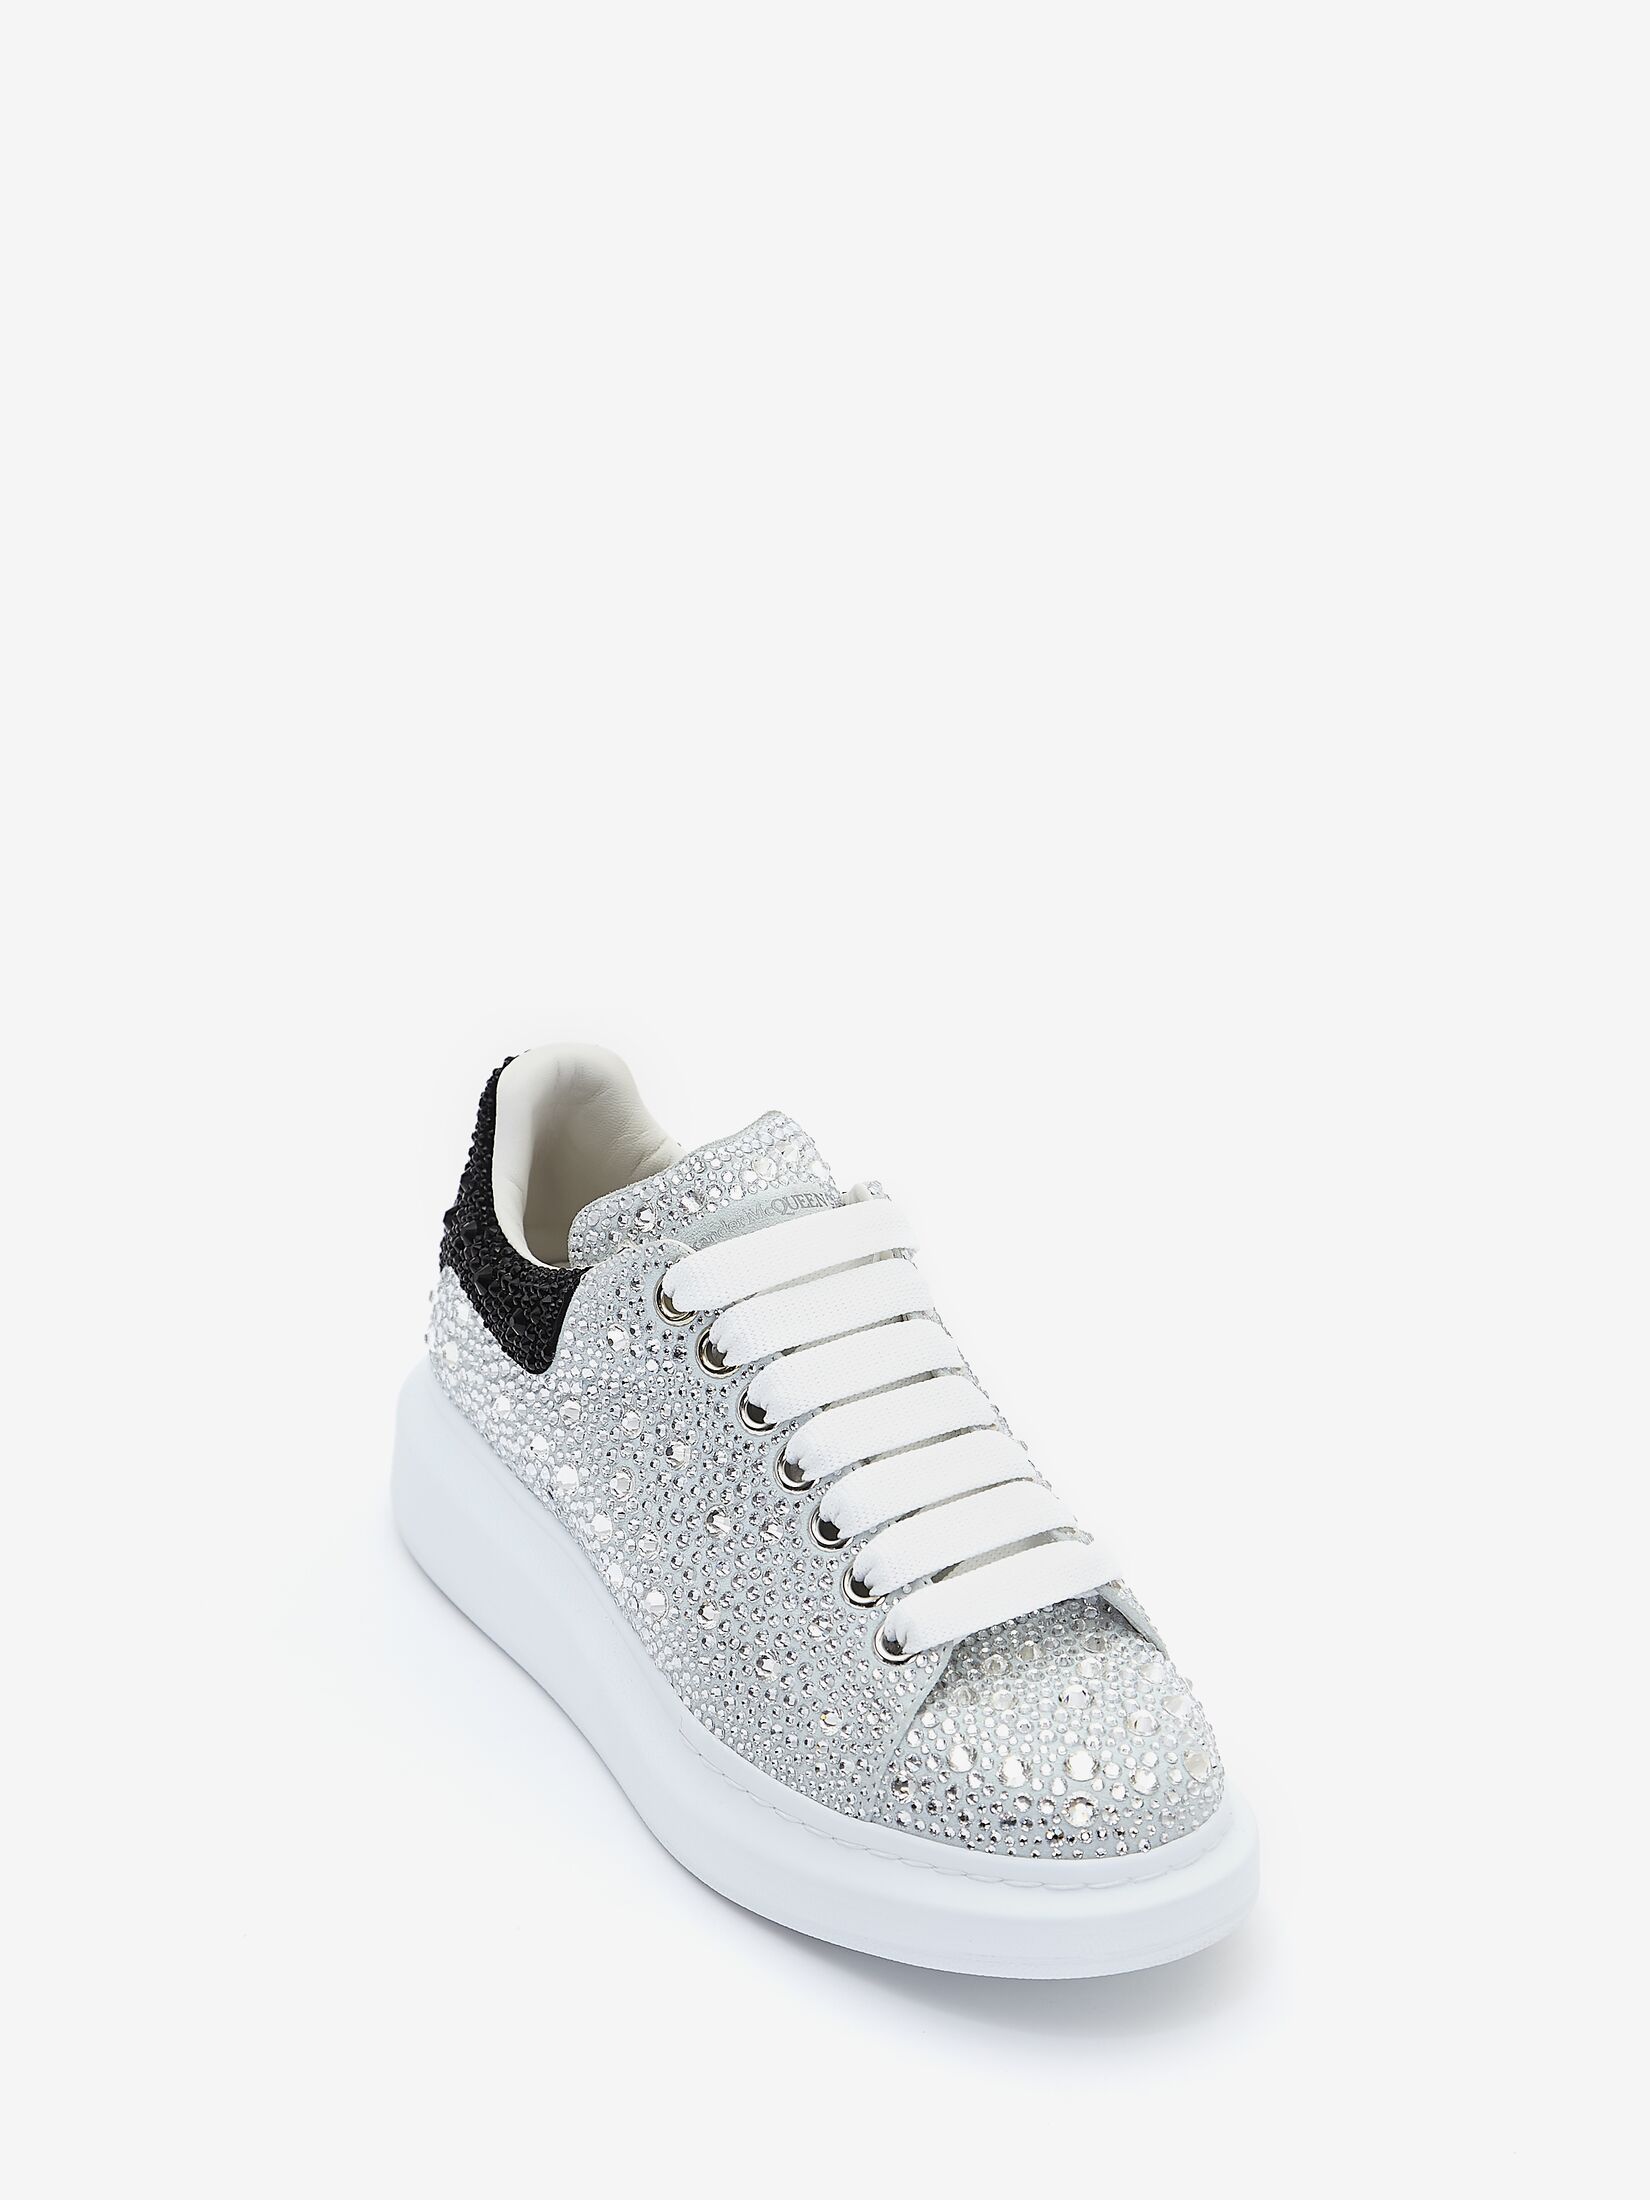 Womens Alexander McQueen nude Leather Crystal-Embellished Oversized Sneakers  | Harrods # {CountryCode}